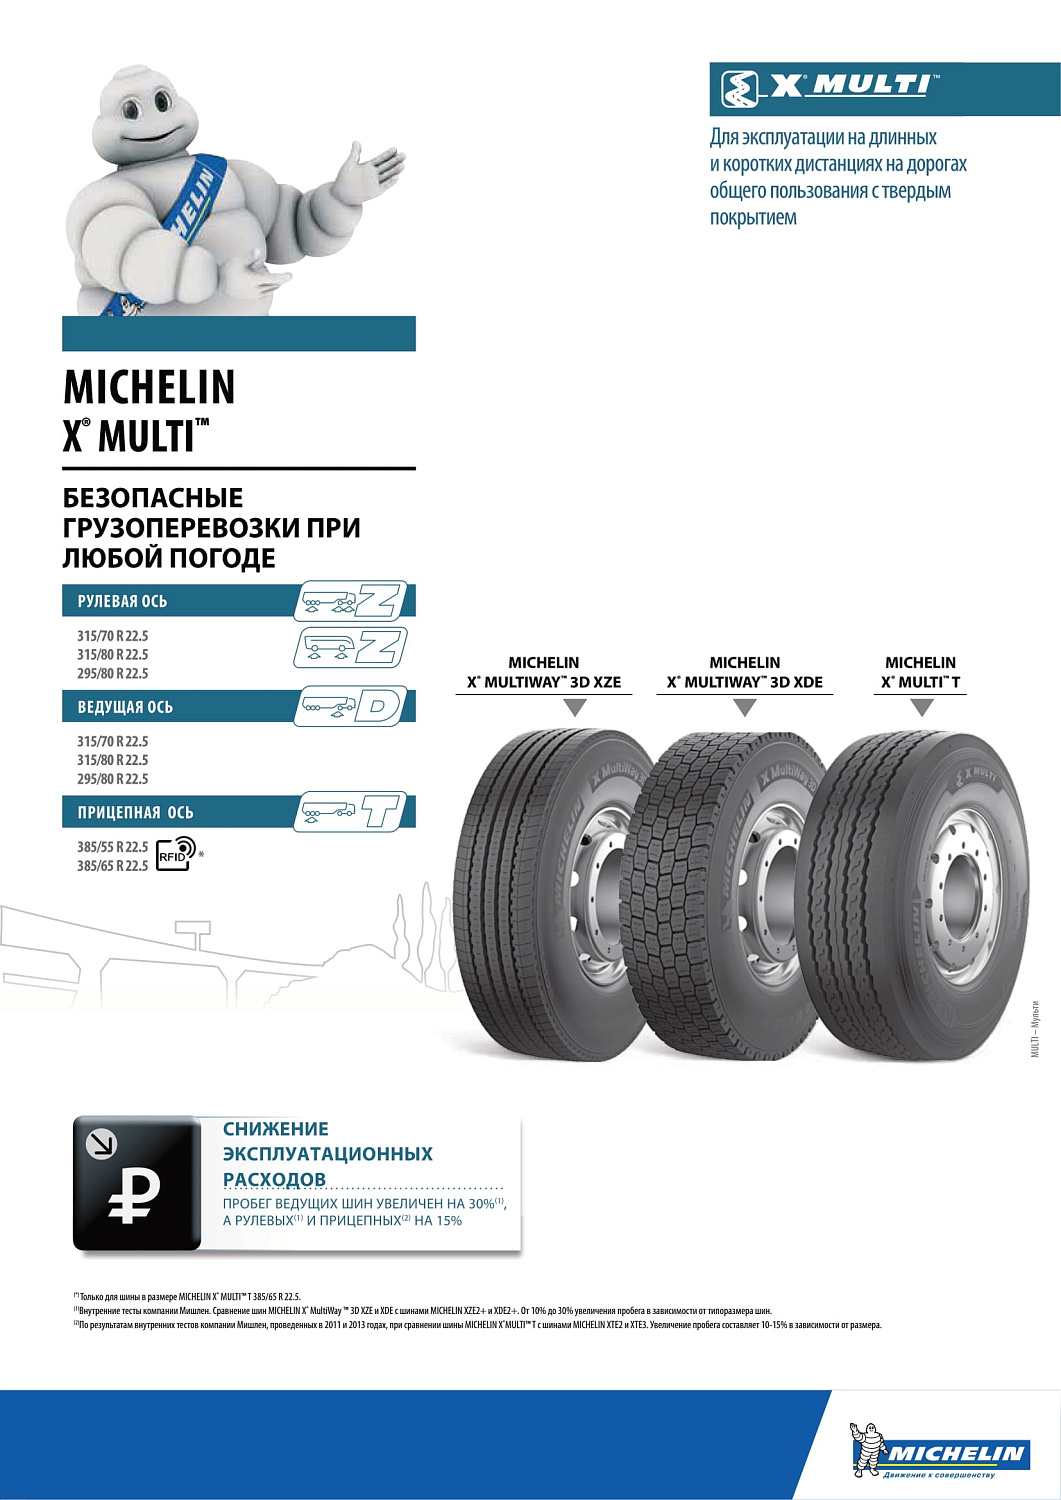 Michelin X MULTIWAY 3D XDE 315/80R22.5